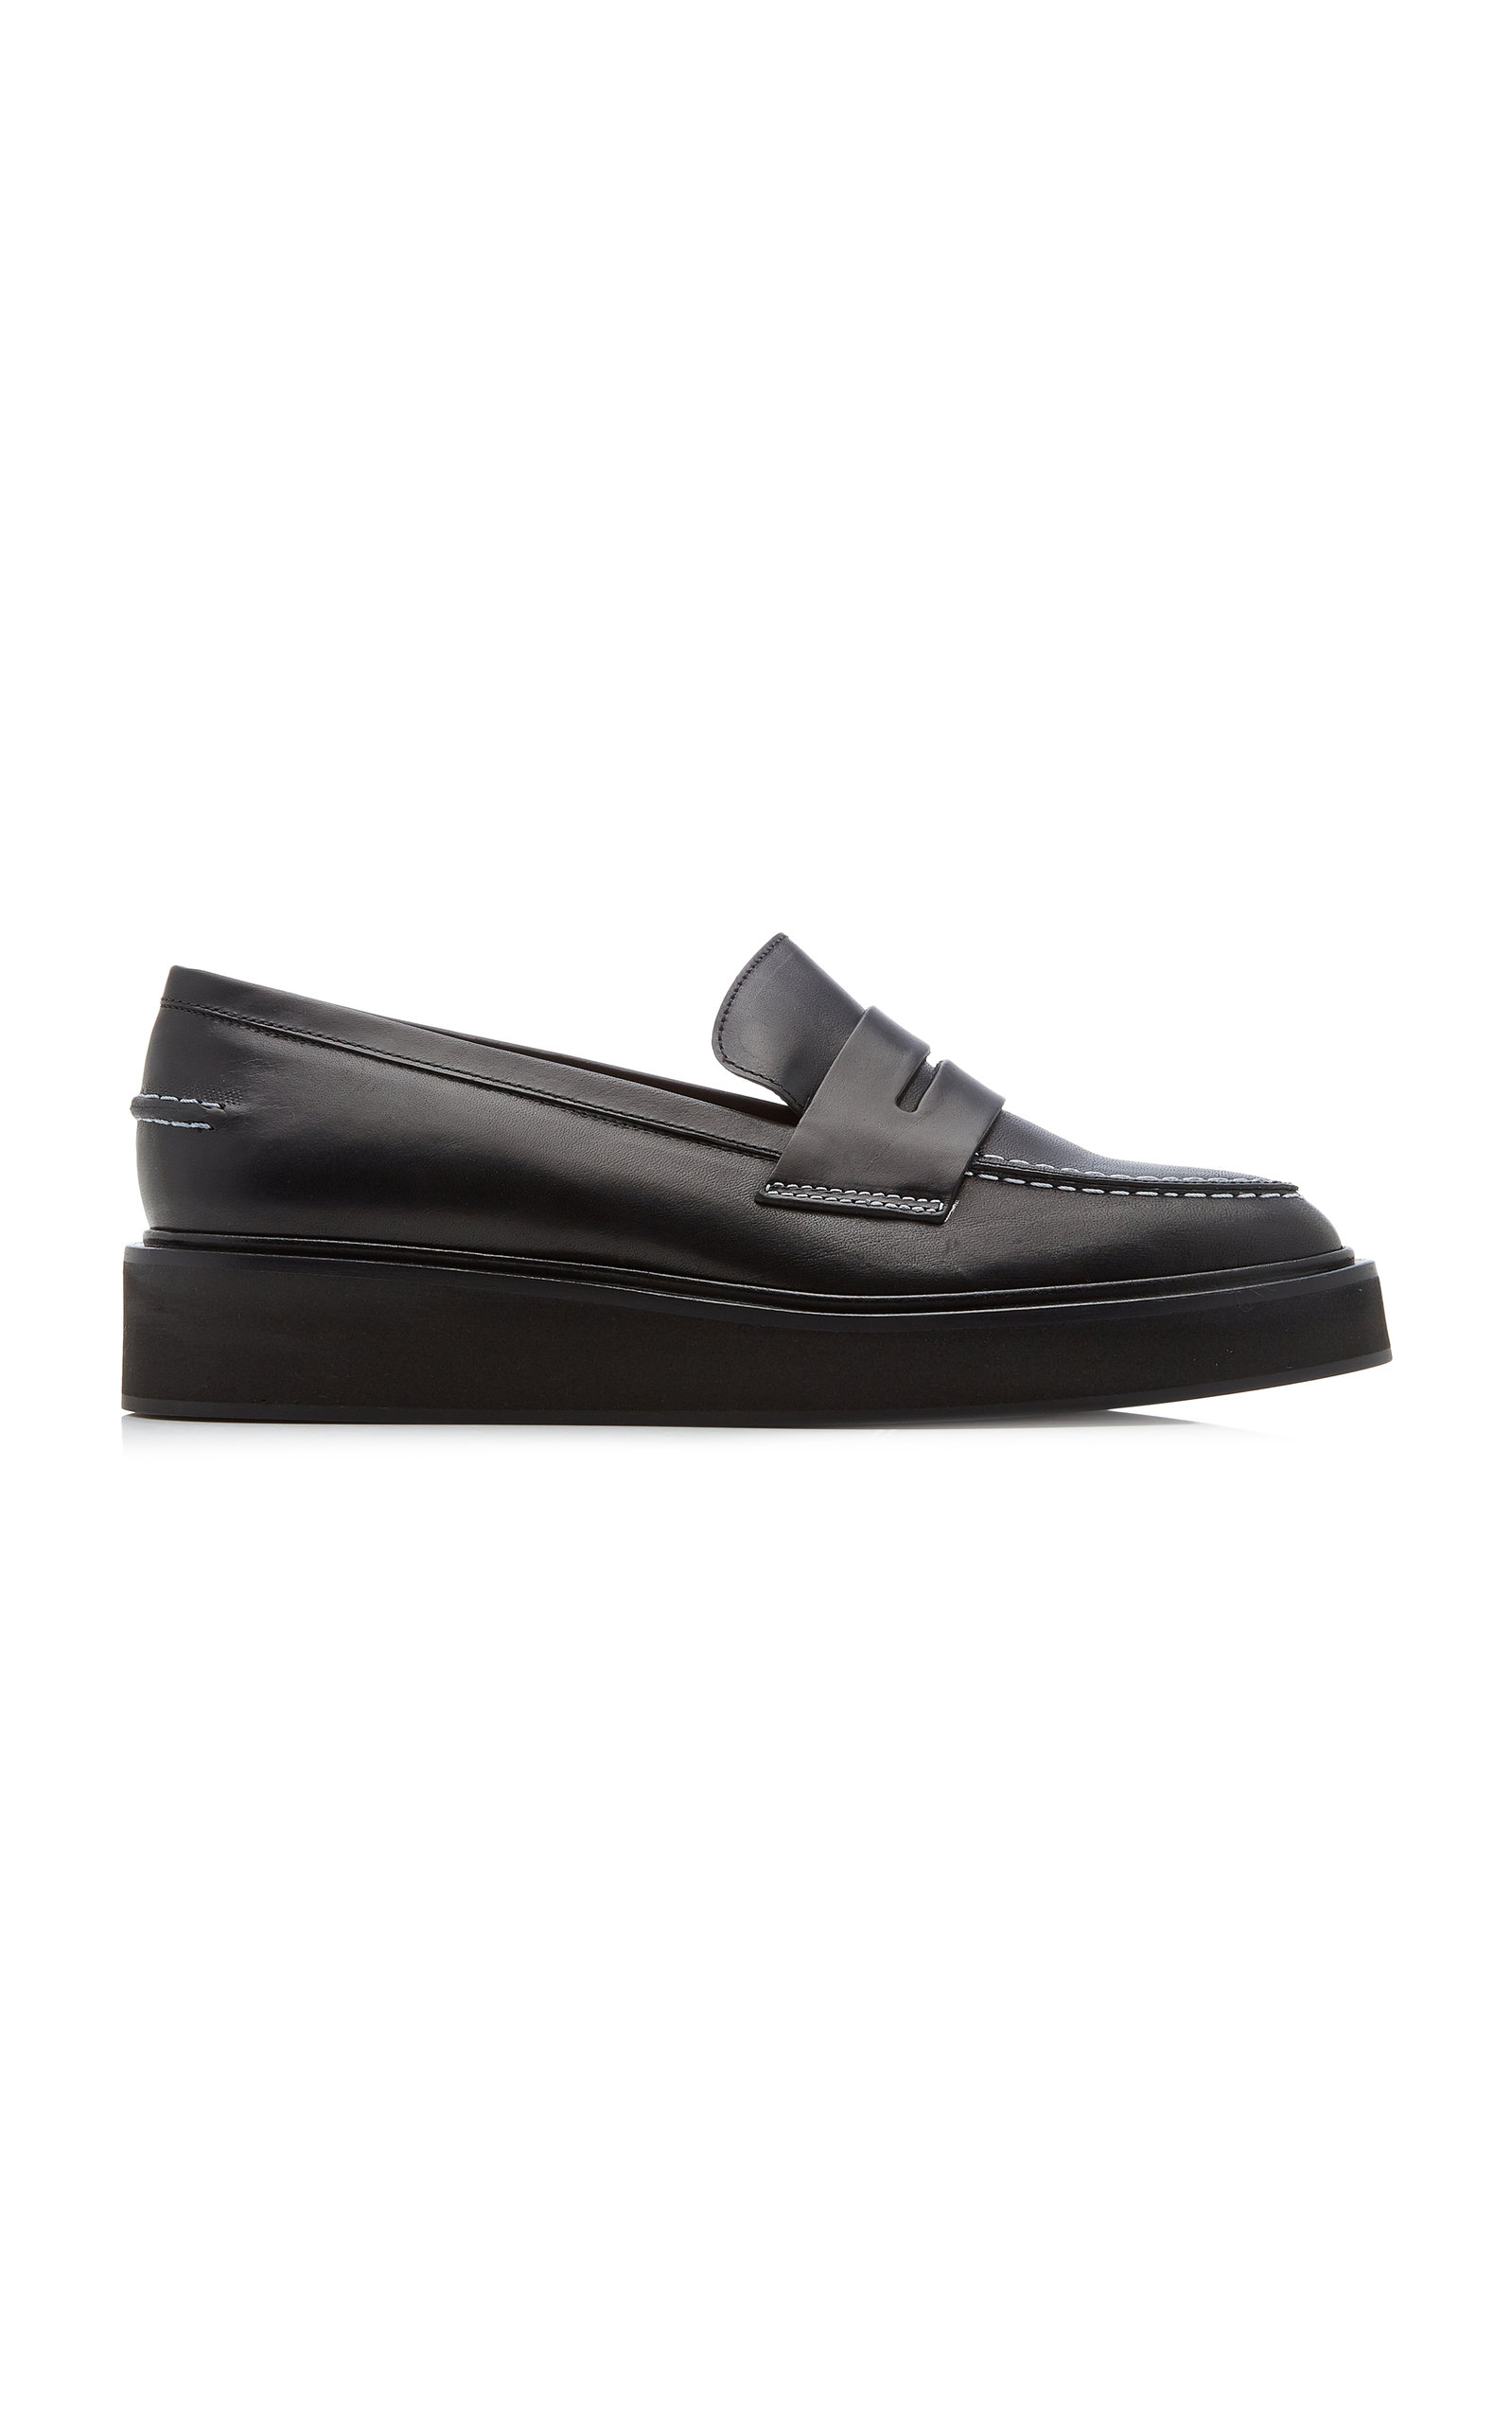 ATP ATELIER WOMEN'S MONSANO LEATHER LOAFERS